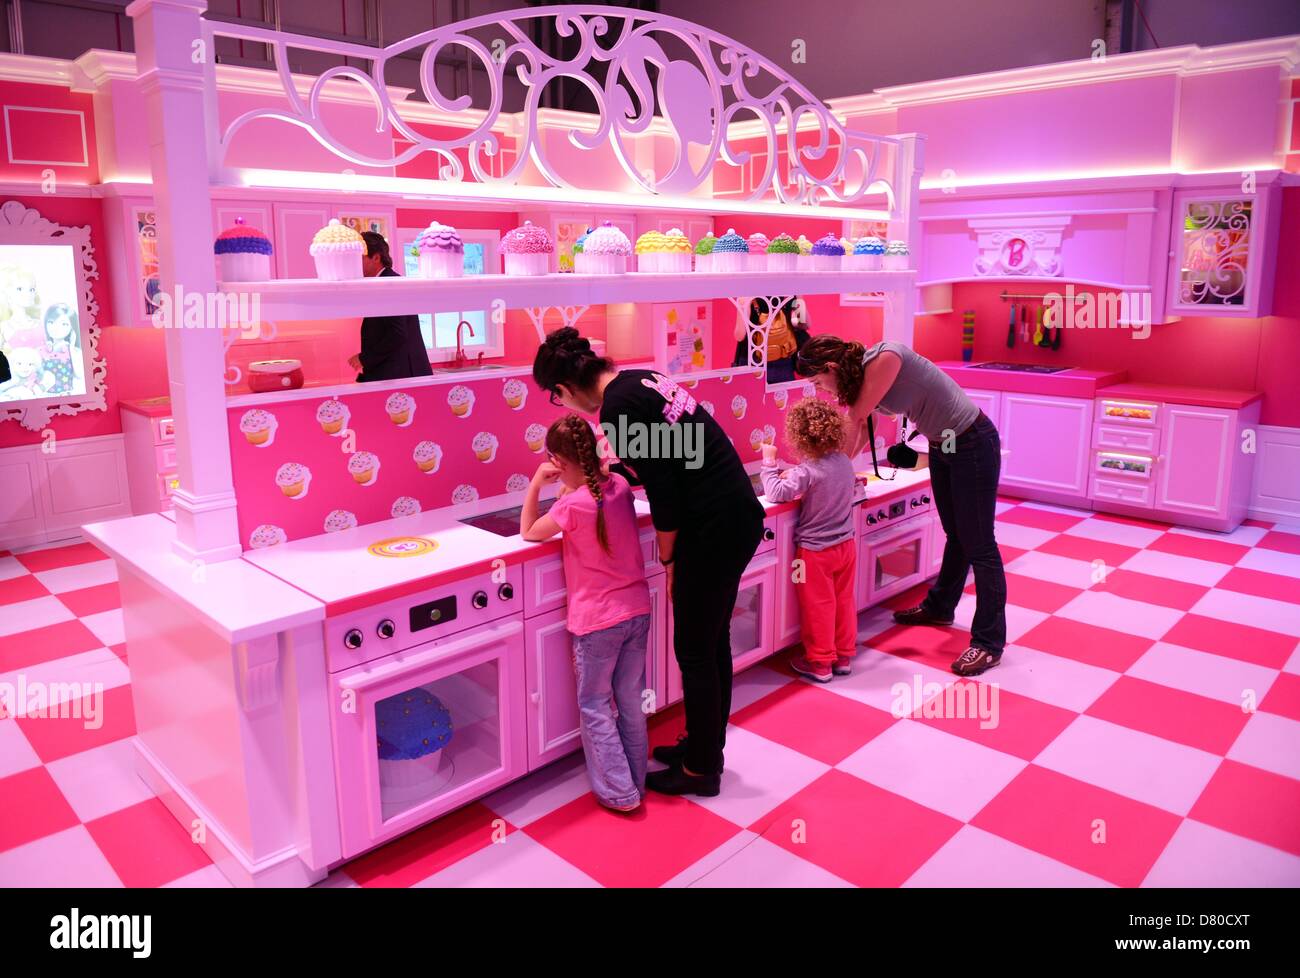 The pink kitchen is pictured in the Barbie Dreamhouse Experience near  Alexanderplatz in Berlin, Germany, 16 May 2013. The 2,500 square meter  Barbie Dreamhouse Experience will be open for three months in